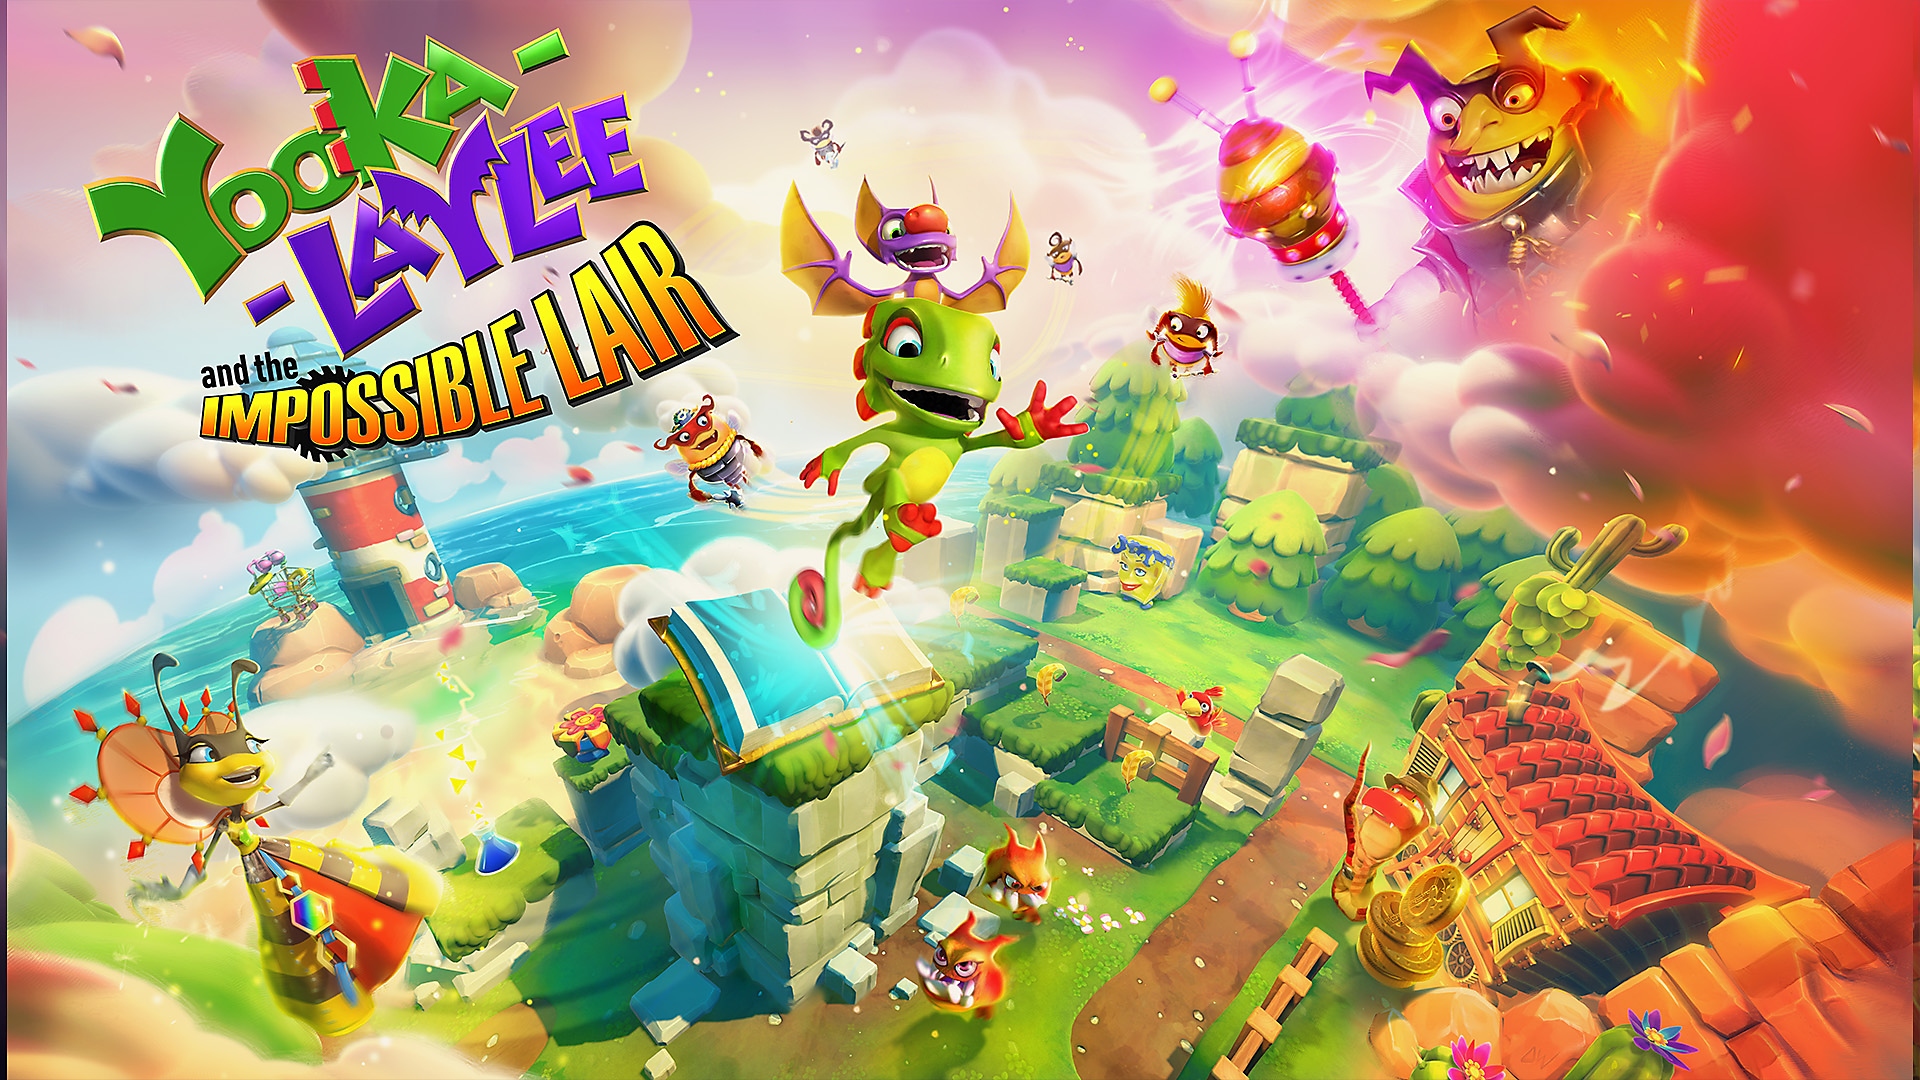 Bande-annonce de Yooka-Laylee and the Impossible Lair